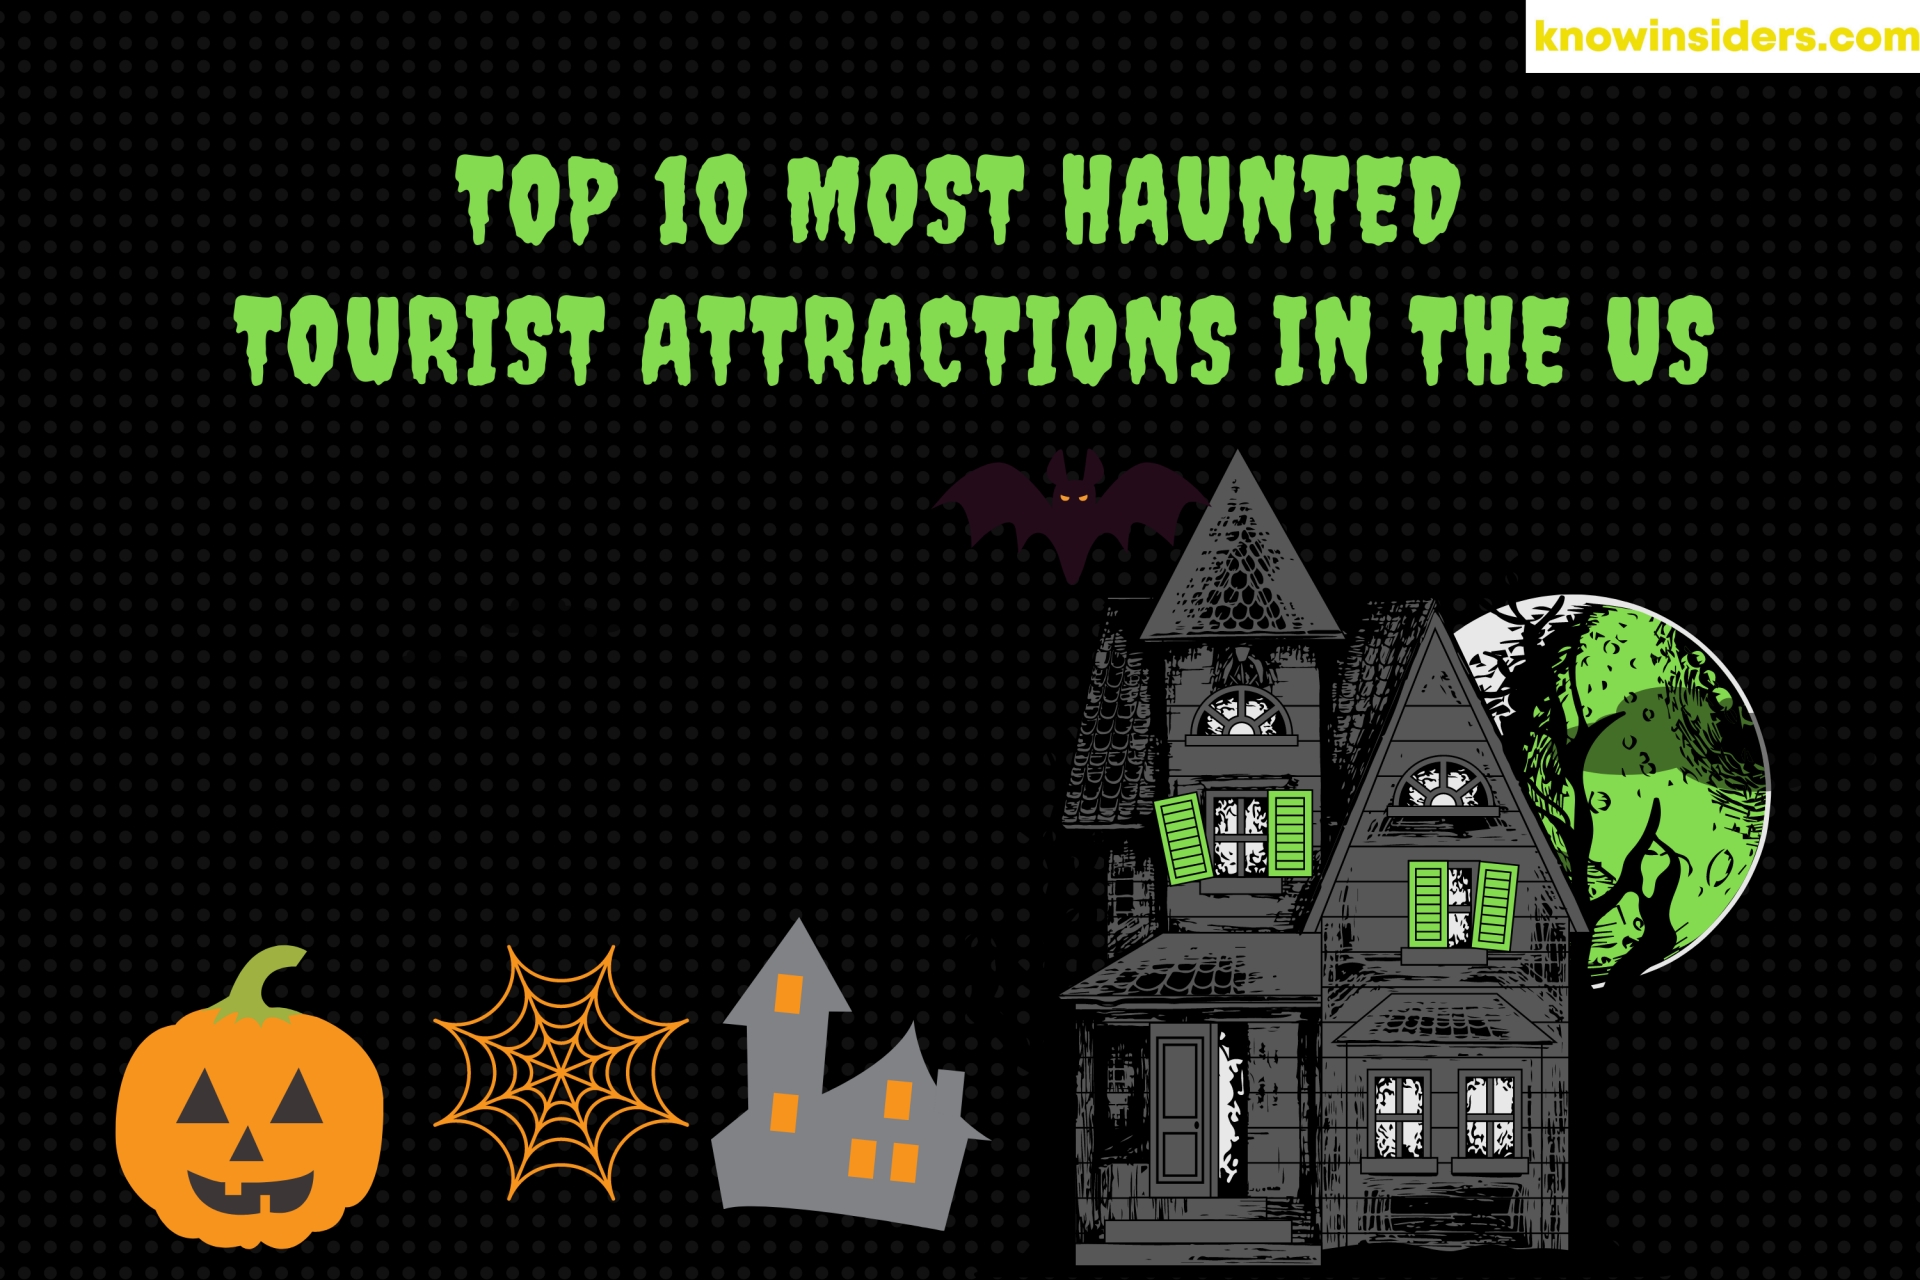 Top 10 Most Haunted and Ghost Tourist Attractions In The United States